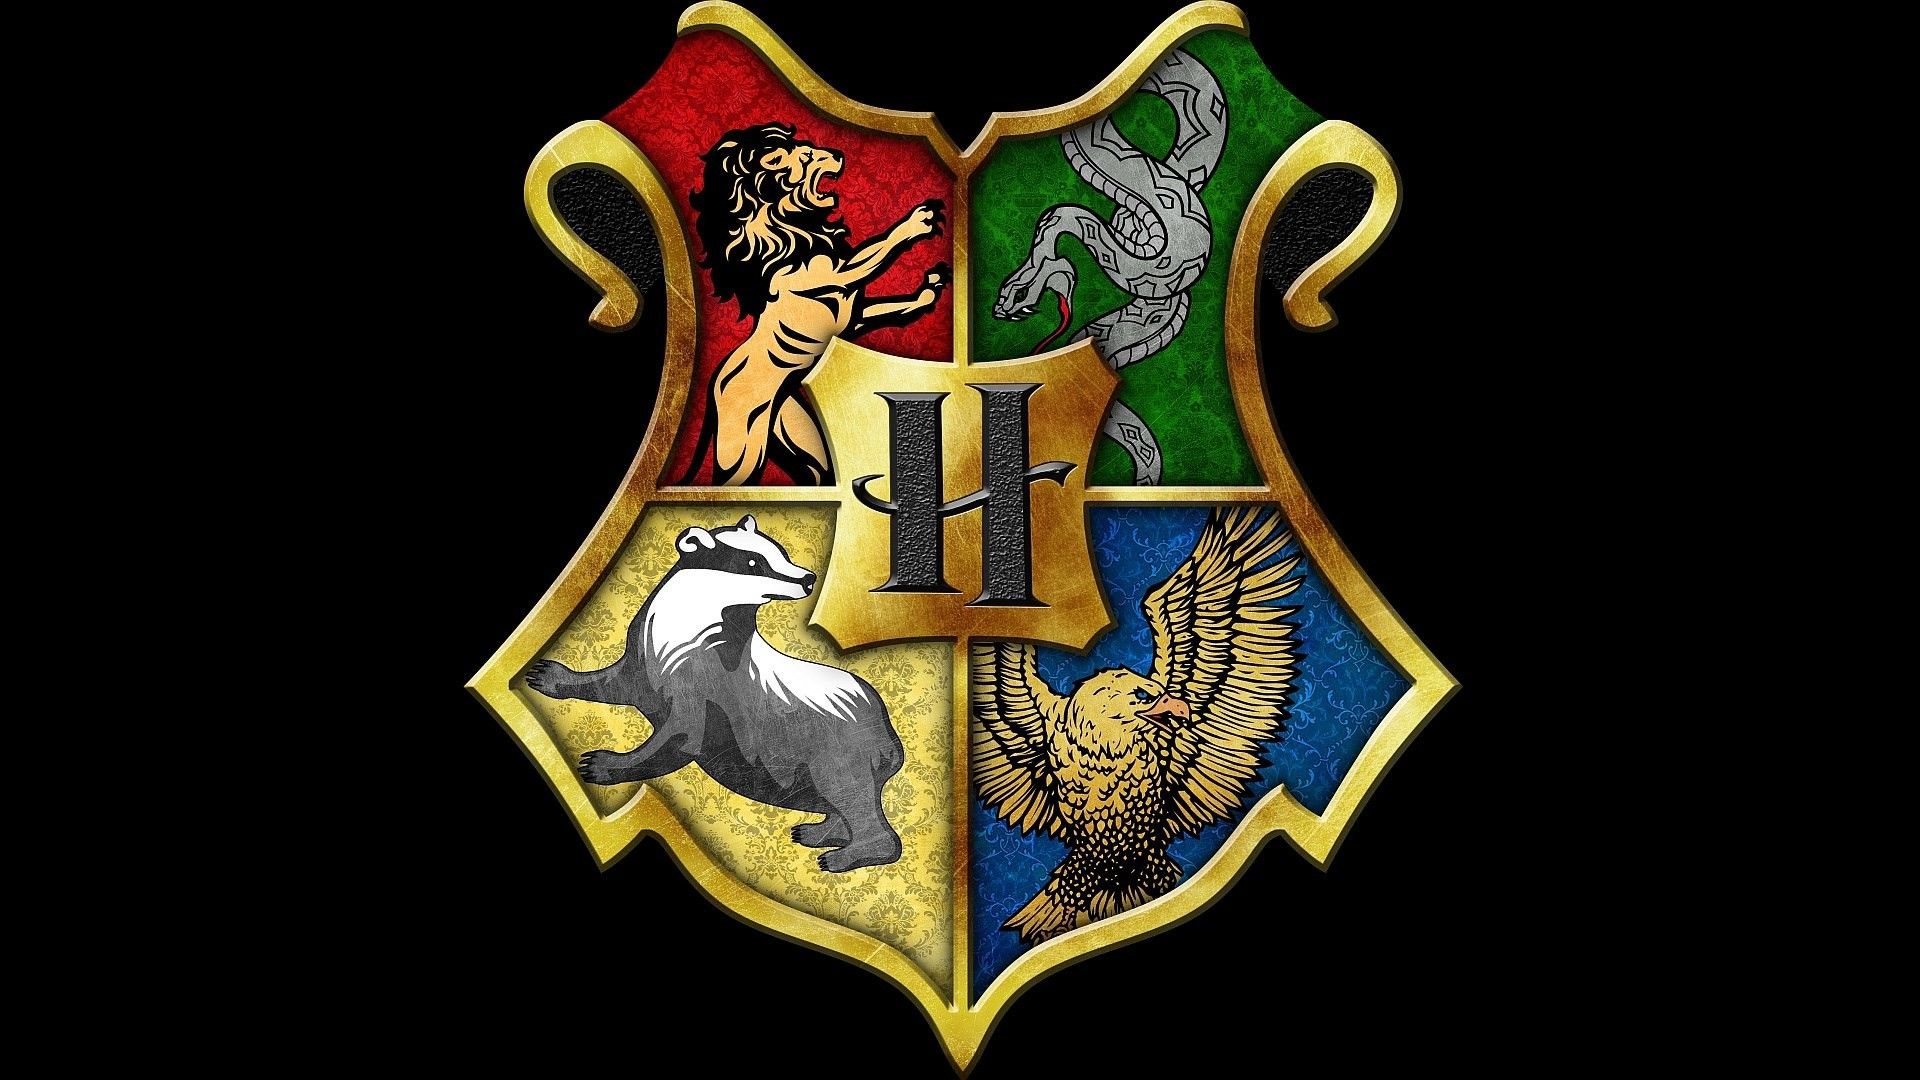 Download Hogwarts Crest With Slytherin Wallpaper | Wallpapers.com